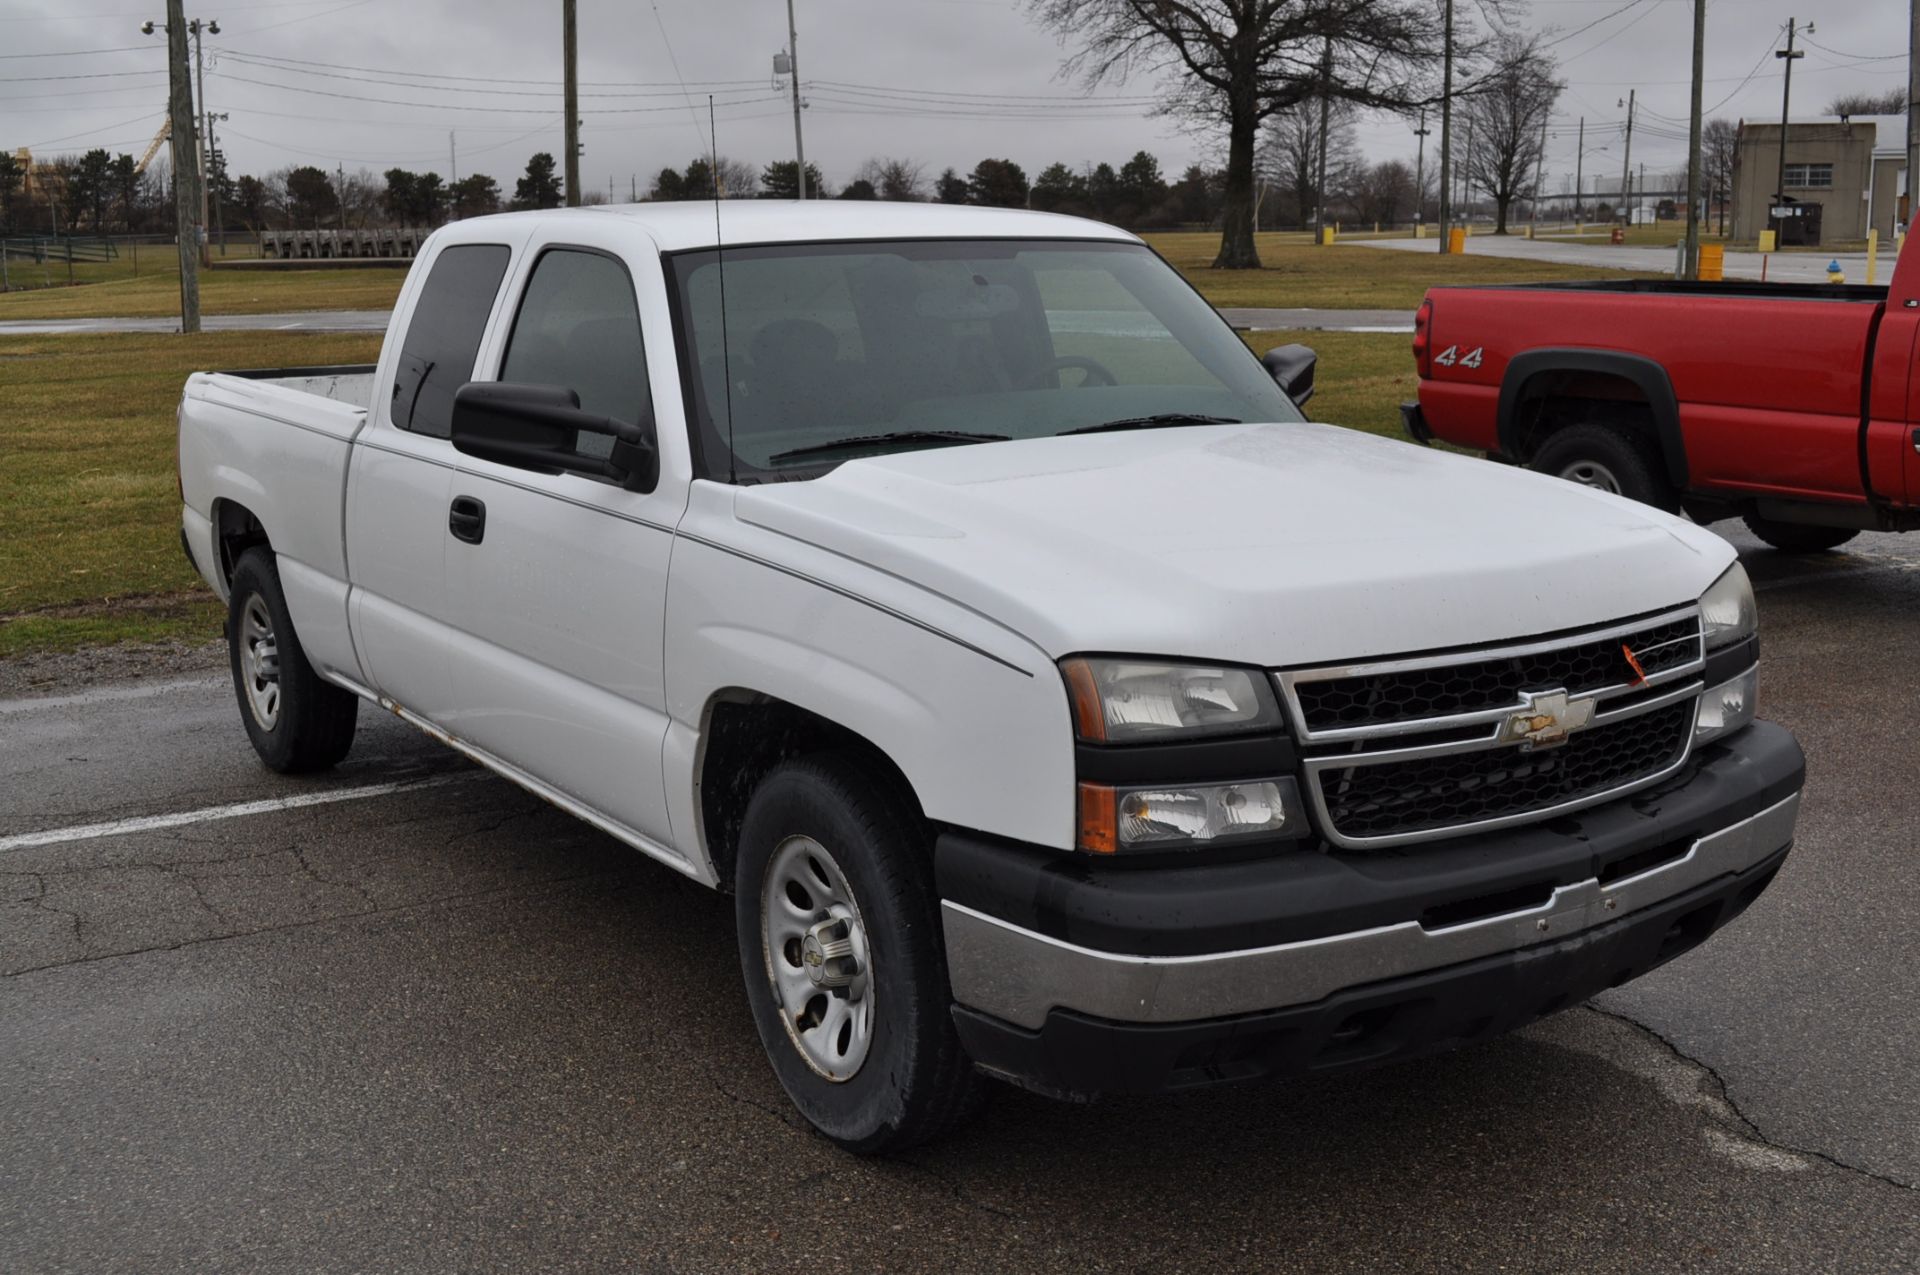 2007 Chevy 1500 ext cab pickup, 2wd, gas, auto, short bed, 245,202 miles, VIN 1GCEC19X87Z121173 - Image 4 of 10